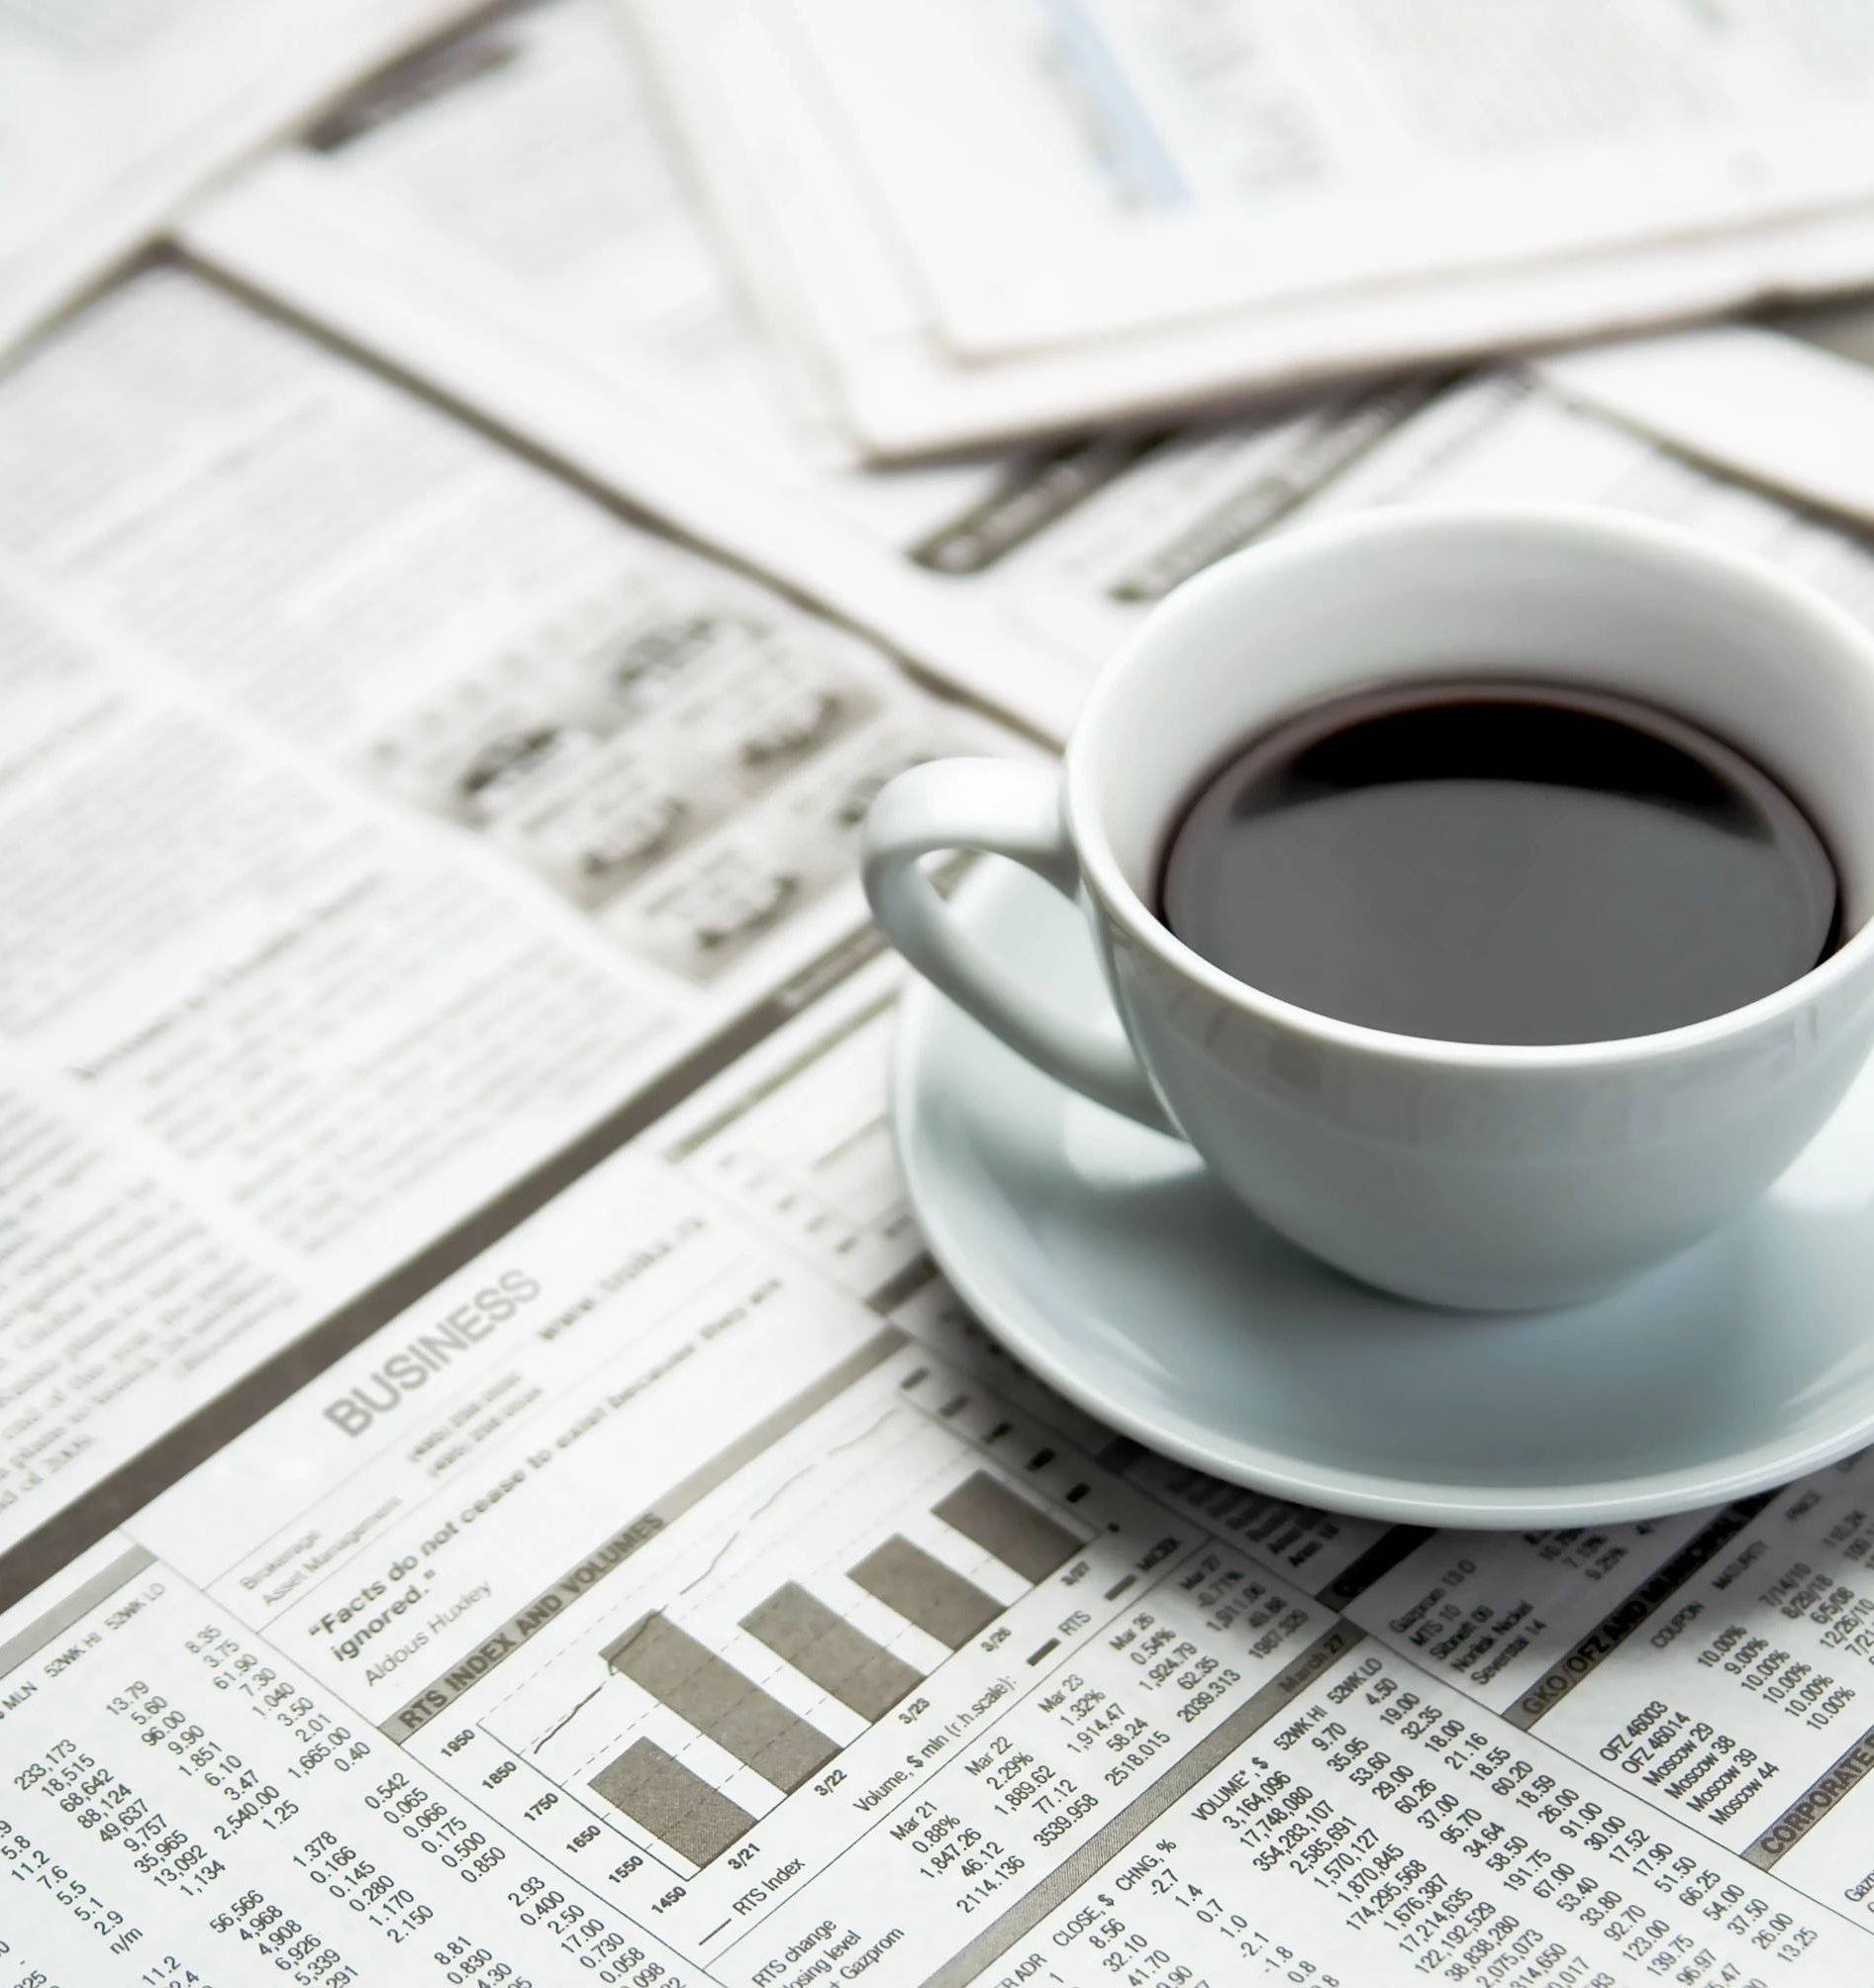 Coffee on a newspaper from Carpet Plus in the Worthington, MN area